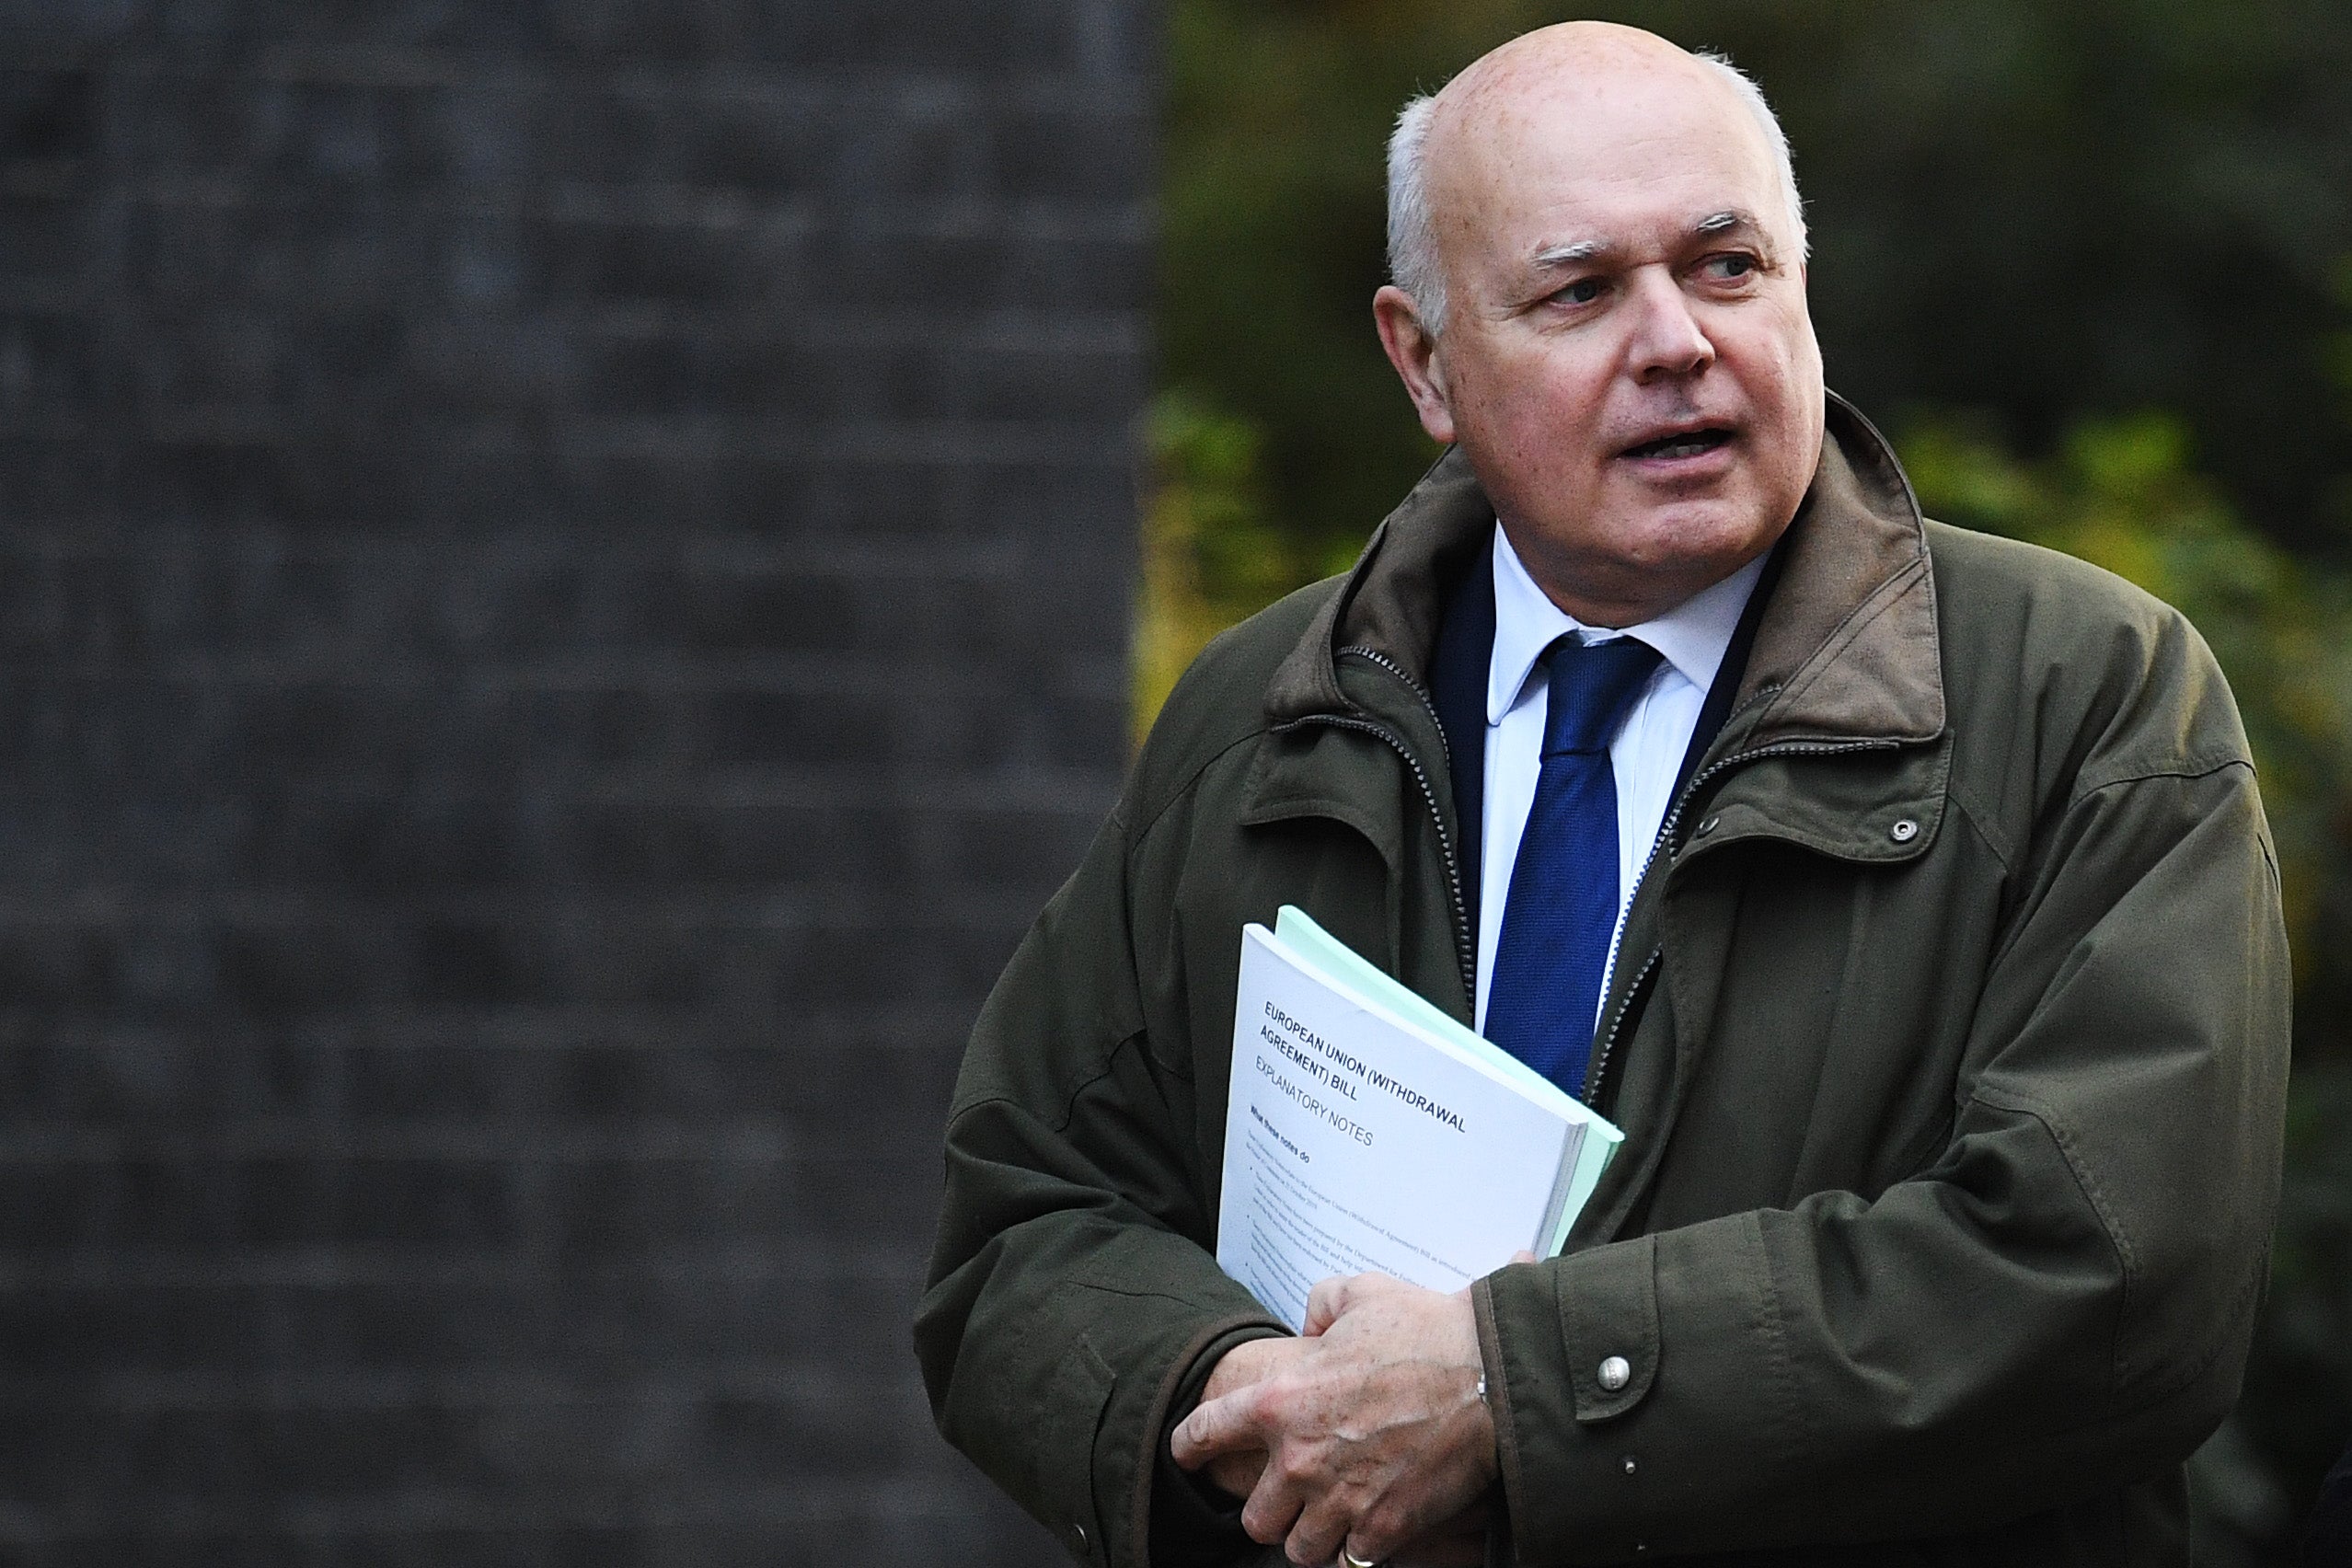 Former Tory leader Iain Duncan Smith warned that in its current form the Nationality and Borders Bill risks ‘undoing’ the Modern Slavery Act